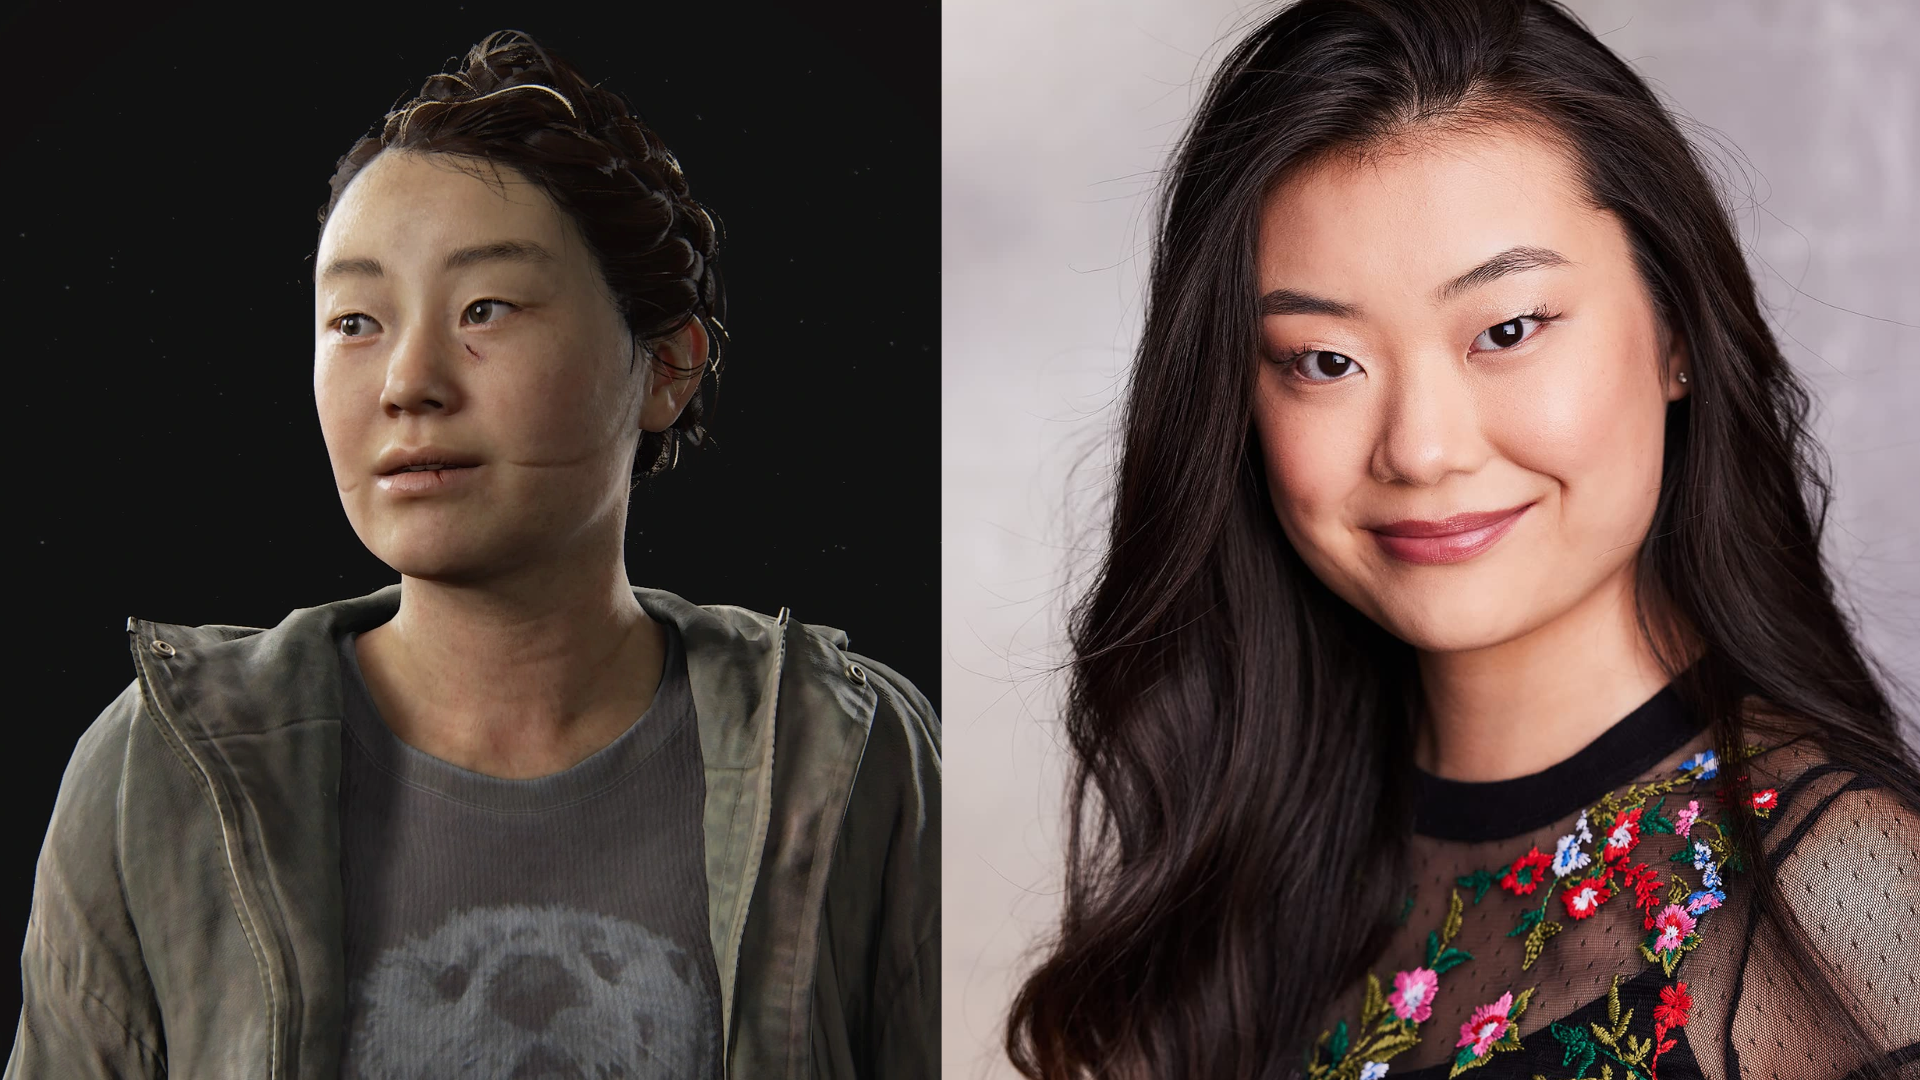 All 5 Actors Who'll Return For The Last of Us Season 2